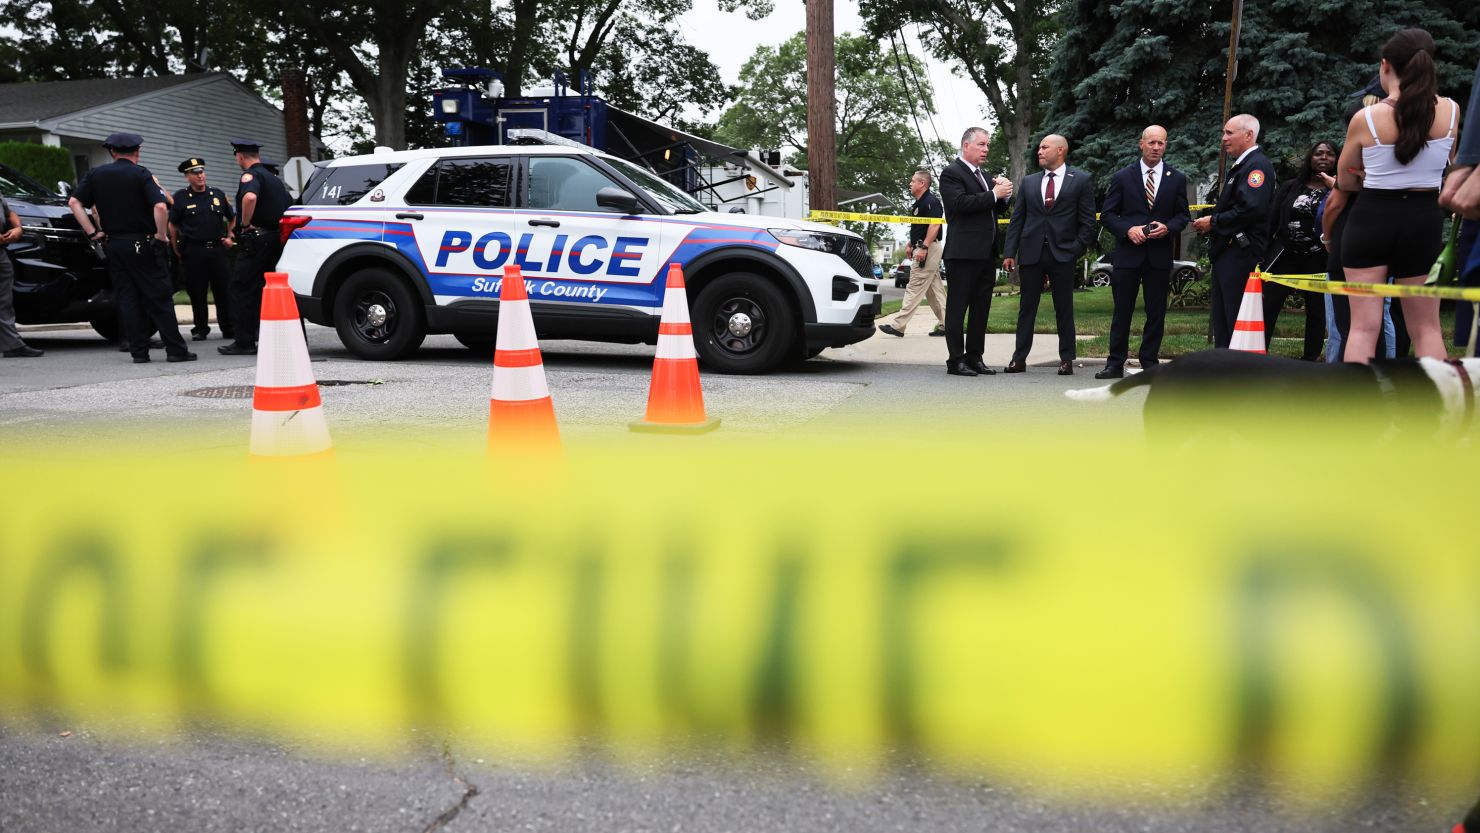 MASSAPEQUA PARK, NEW YORK - JULY 14: Law enforcement officials are seen as they investigate the home of a suspect arrested in the unsolved Gilgo Beach killings on July 14, 2023 in Massapequa Park, New York. A suspect in the Gilgo Beach killings was arrested in the unsolved case tied to at least 10 sets of human remains that were discovered since 2010 in suburban Long Island.  The suspect Rex Heuermann is expected to be arraigned after his arrest Thursday night.  (Photo by Michael M. Santiago/Getty Images)